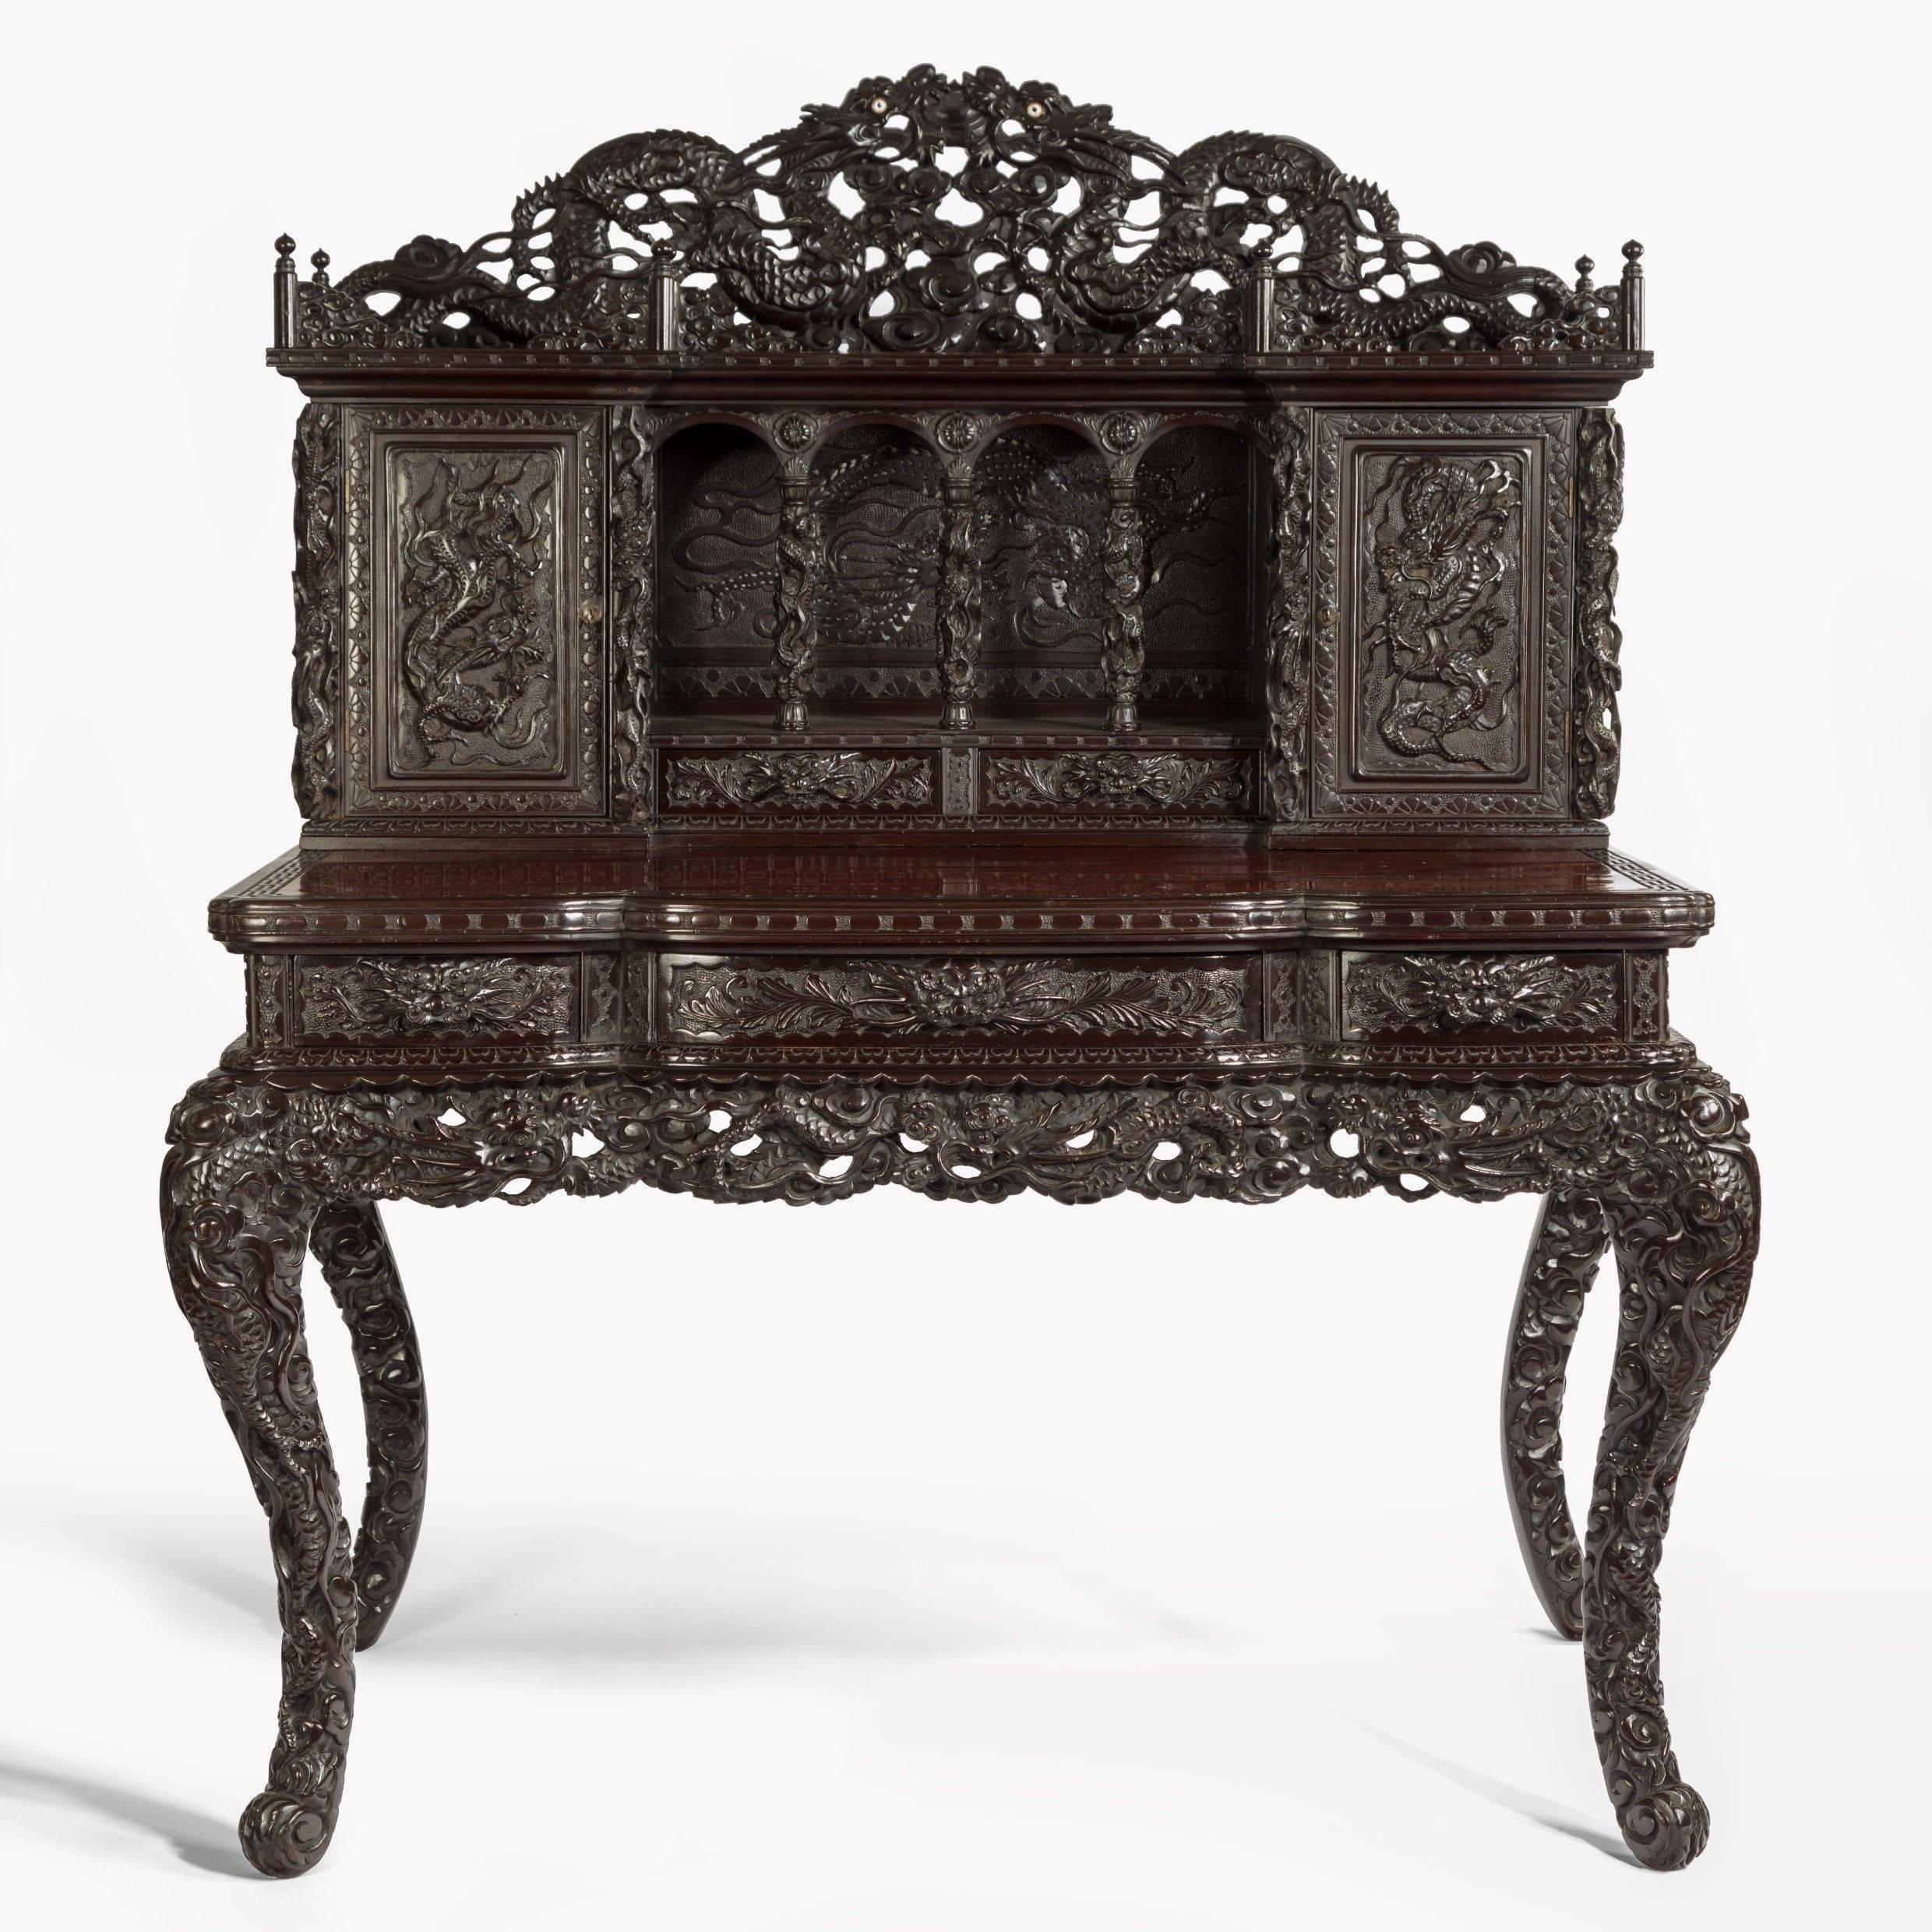 A Meiji period carved hardwood desk and chair made for the Panama California Exposition of 1915-1917, the desk with a shaped rectangular top with two short and one long frieze drawers supported by cabriole legs, the upper section comprising four